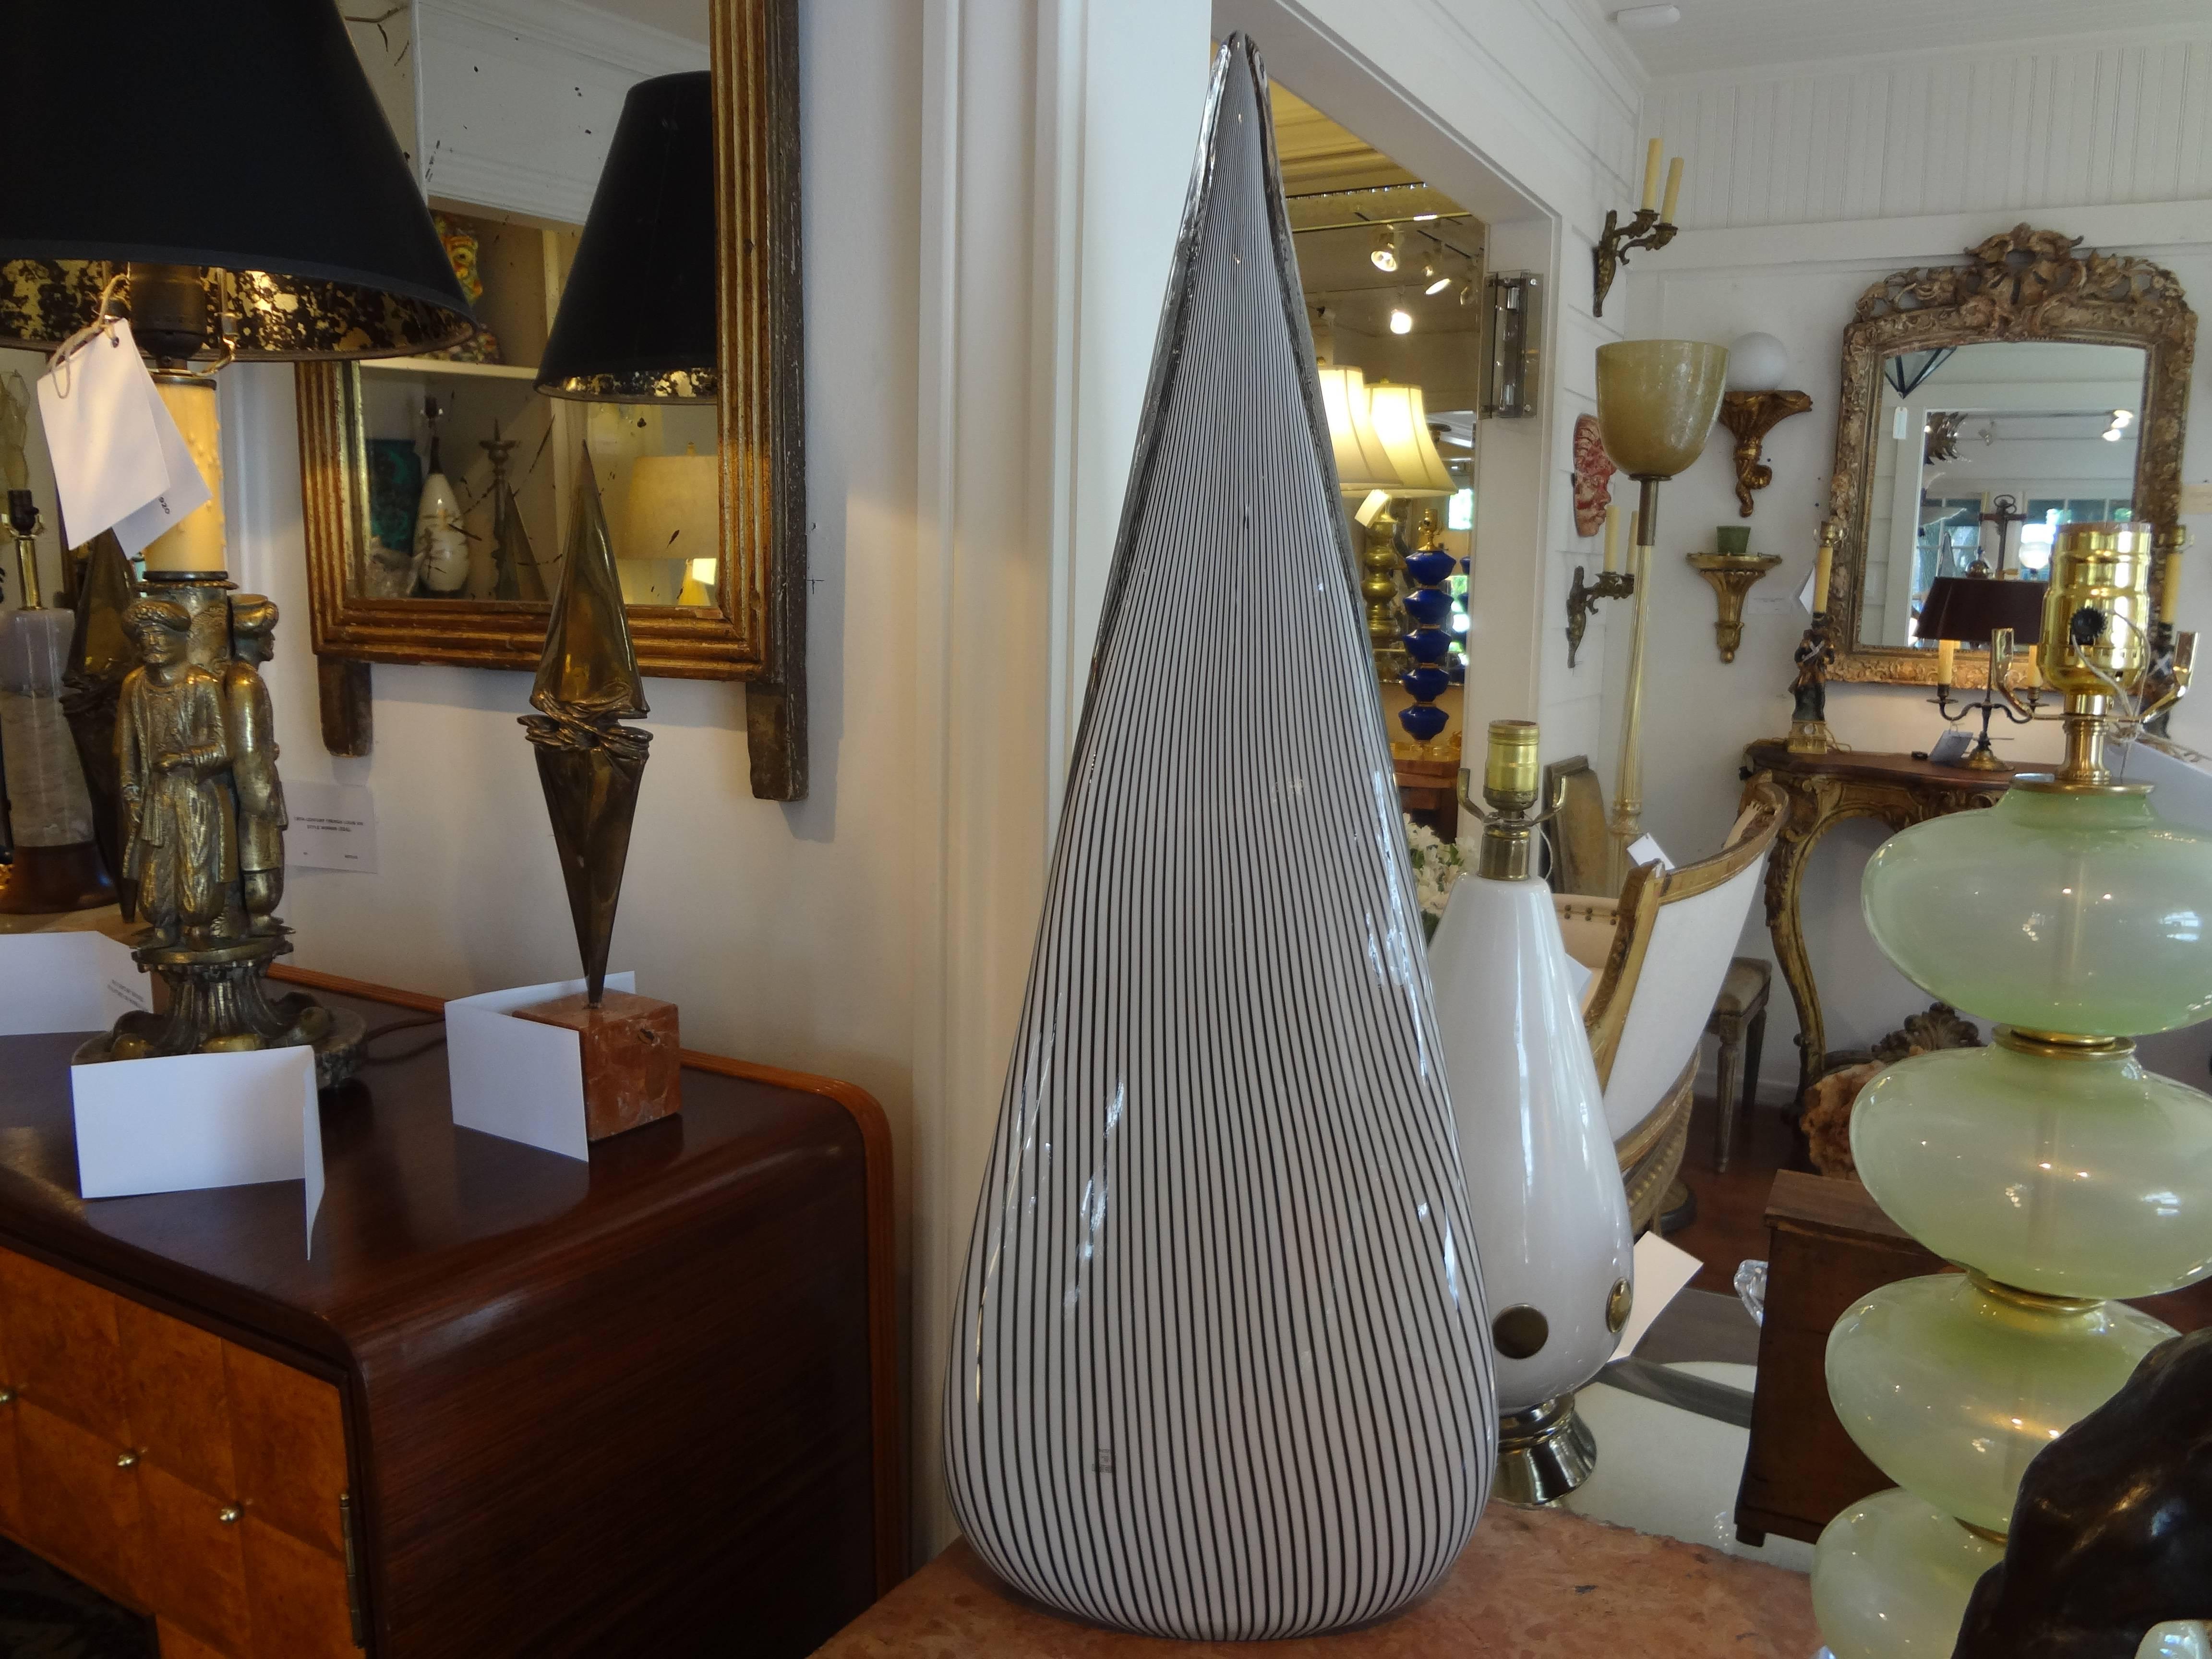 Pair of Murano glass lamps by Vetri.
Large pair of Postmodern Murano glass pyramid or triangular shaped lamps. This unusual and rare pair of Italian lamps was manufactured by Vetri, Murano in the 1970s. These Venetian glass table lamps have a black